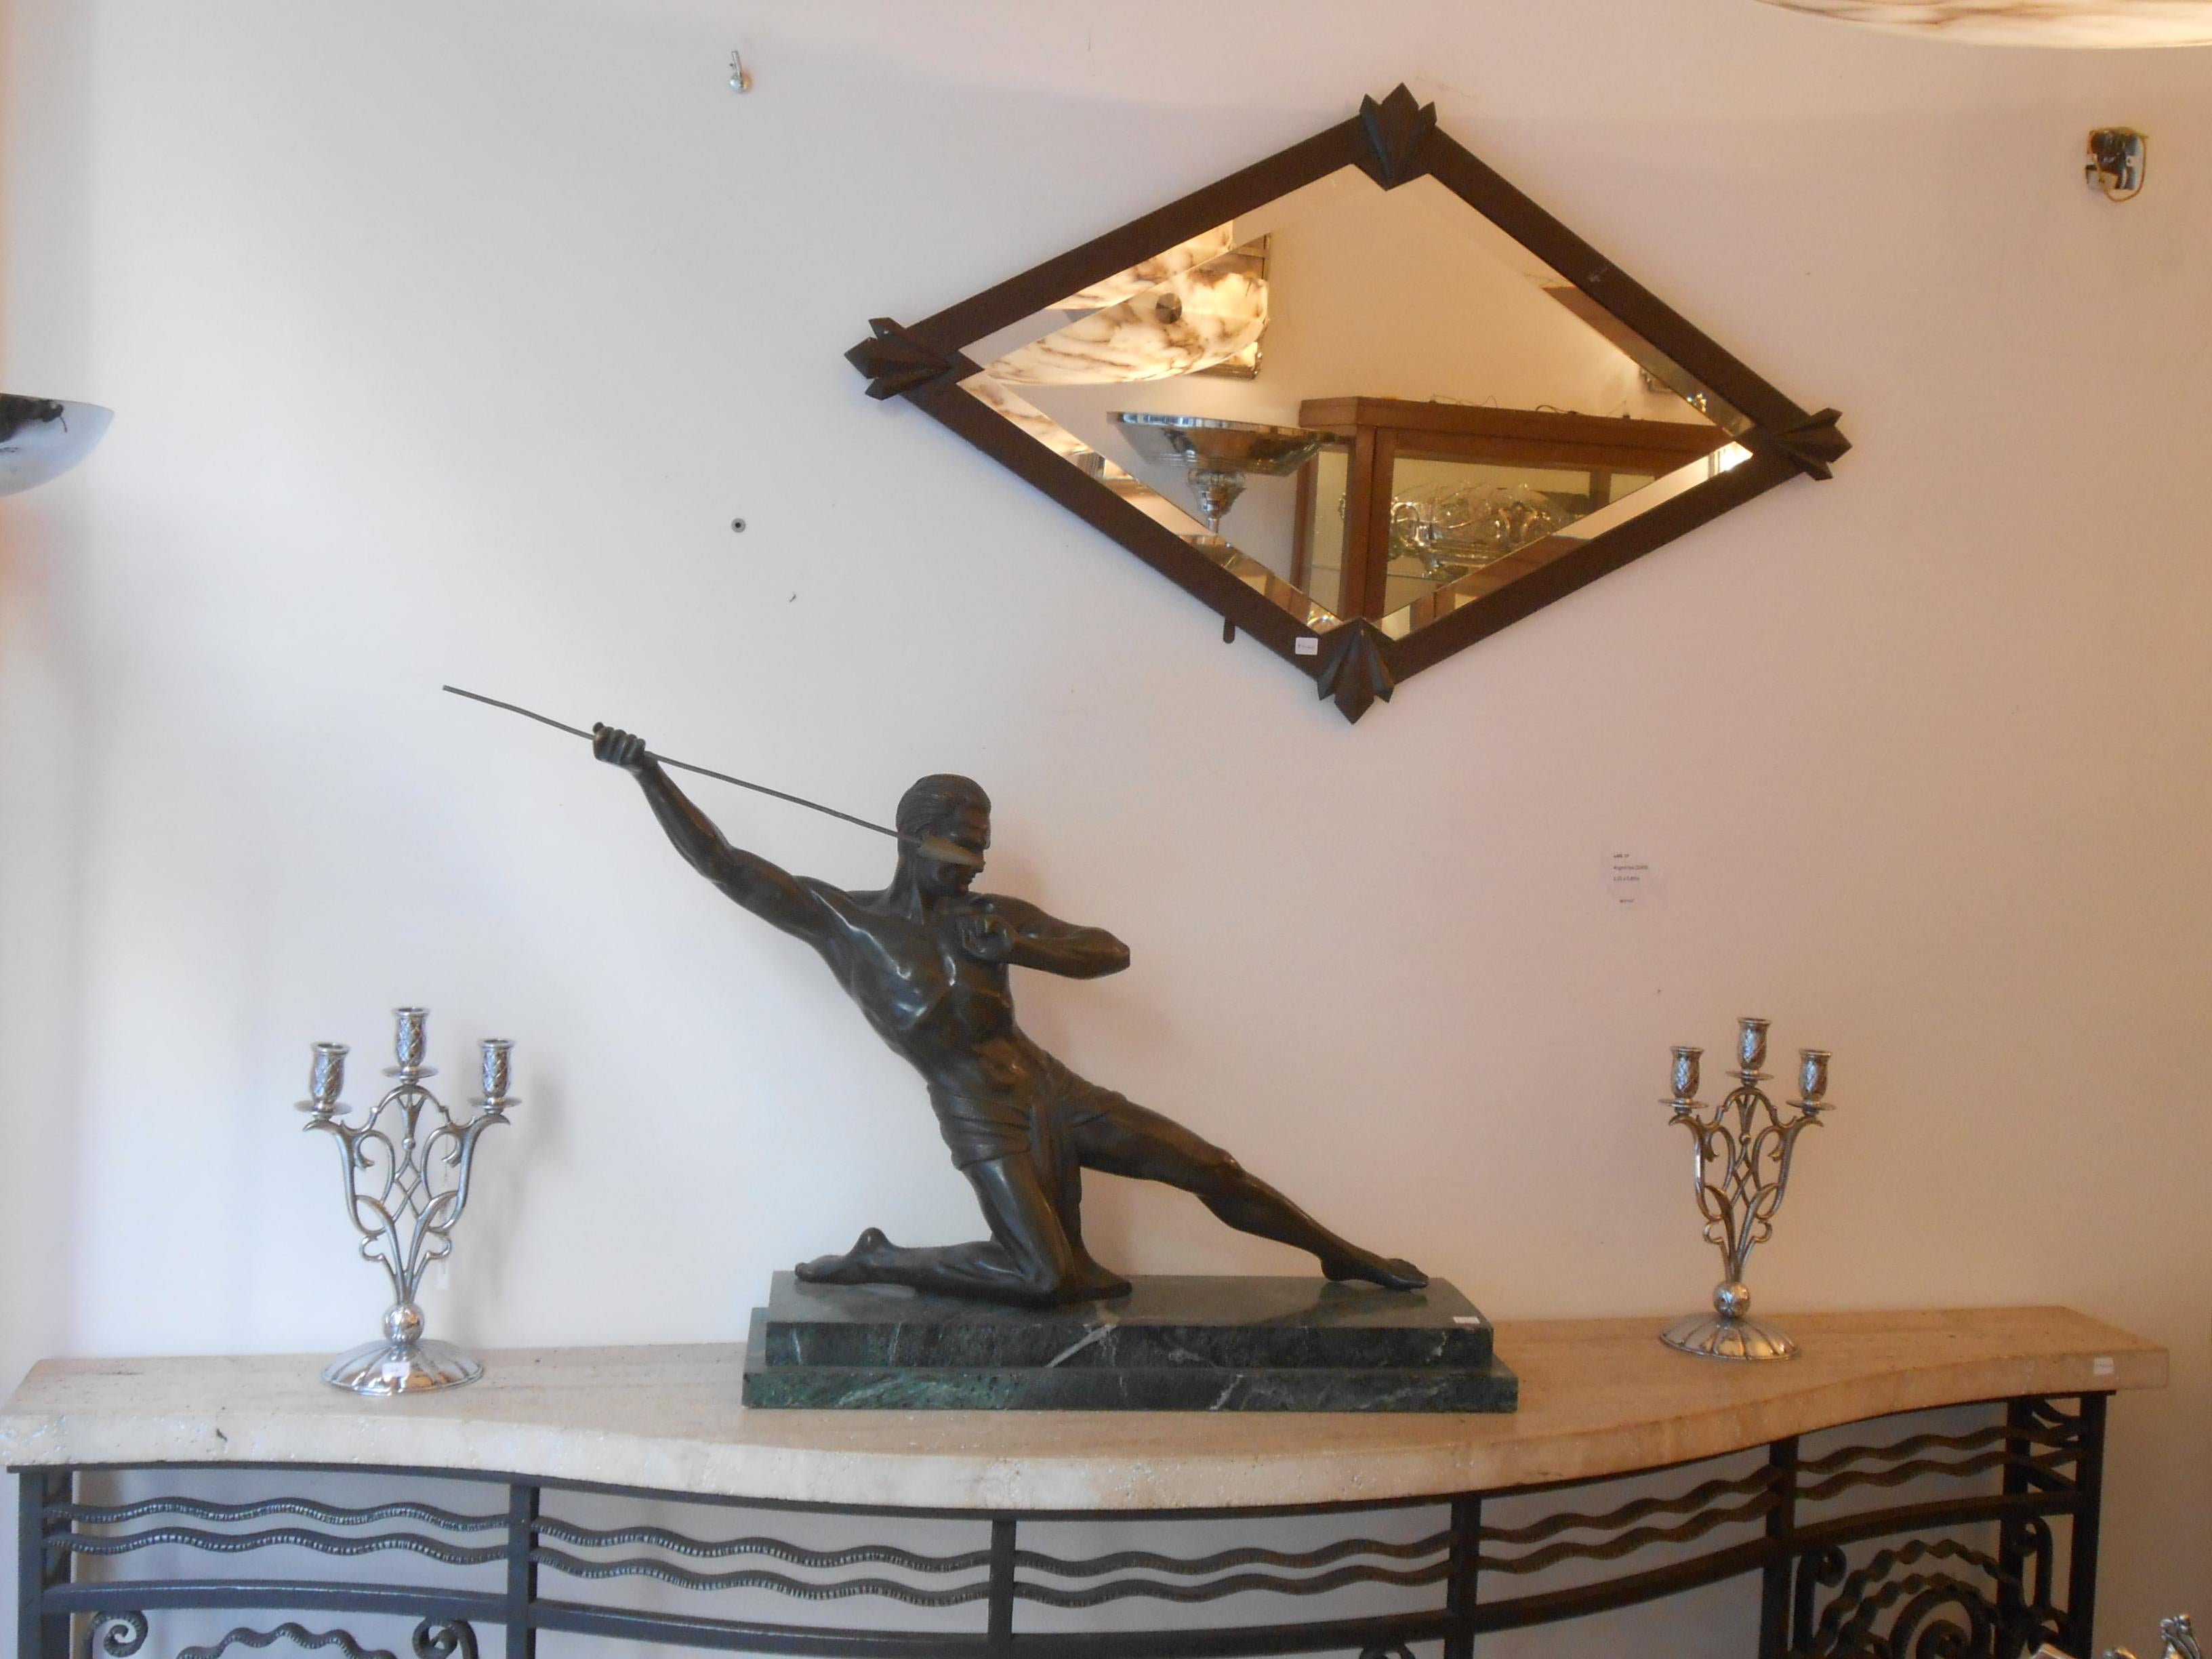 Candelabra
Jugendstil, Art Nouveau, Liberty
We have specialized in the sale of Art Deco and Art Nouveau and Vintage styles since 1982. If you have any questions we are at your disposal.
Pushing the button that reads 'View All From Seller'. And